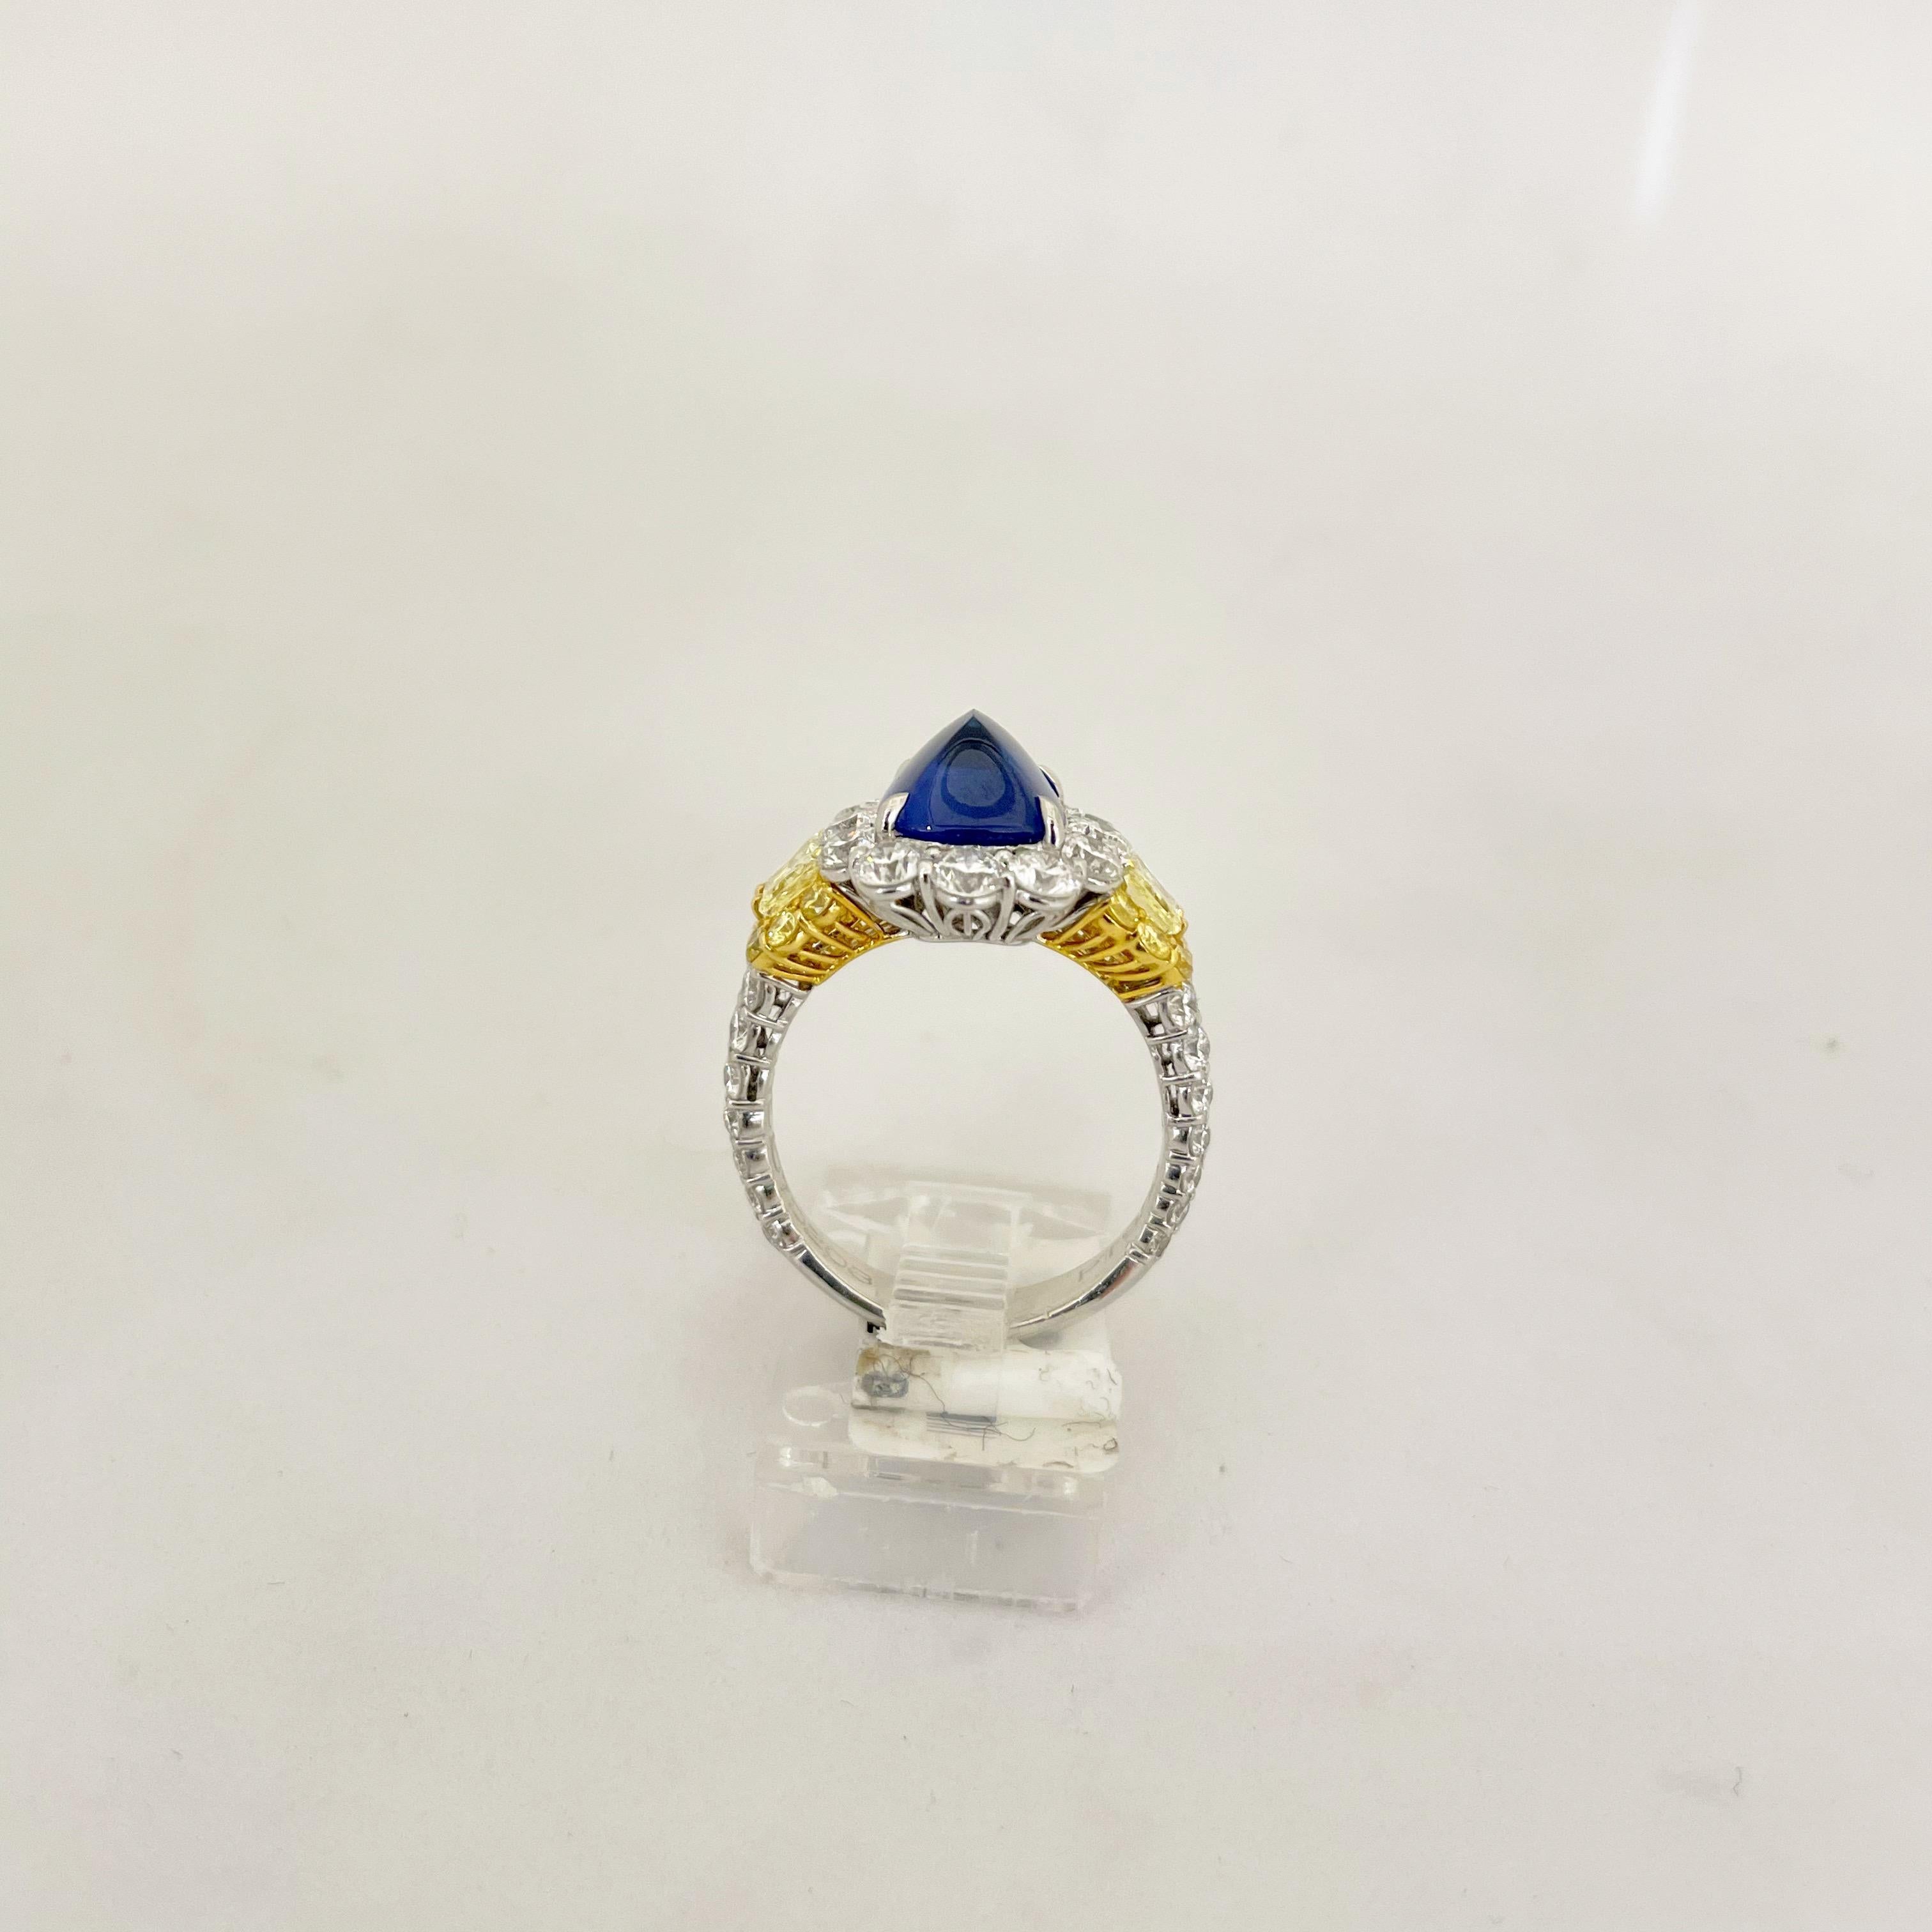 Cellini Plat/18KT 4.27Ct. Sugarloaf Sapphire, Fancy Yellow & White Diamond Ring For Sale 1